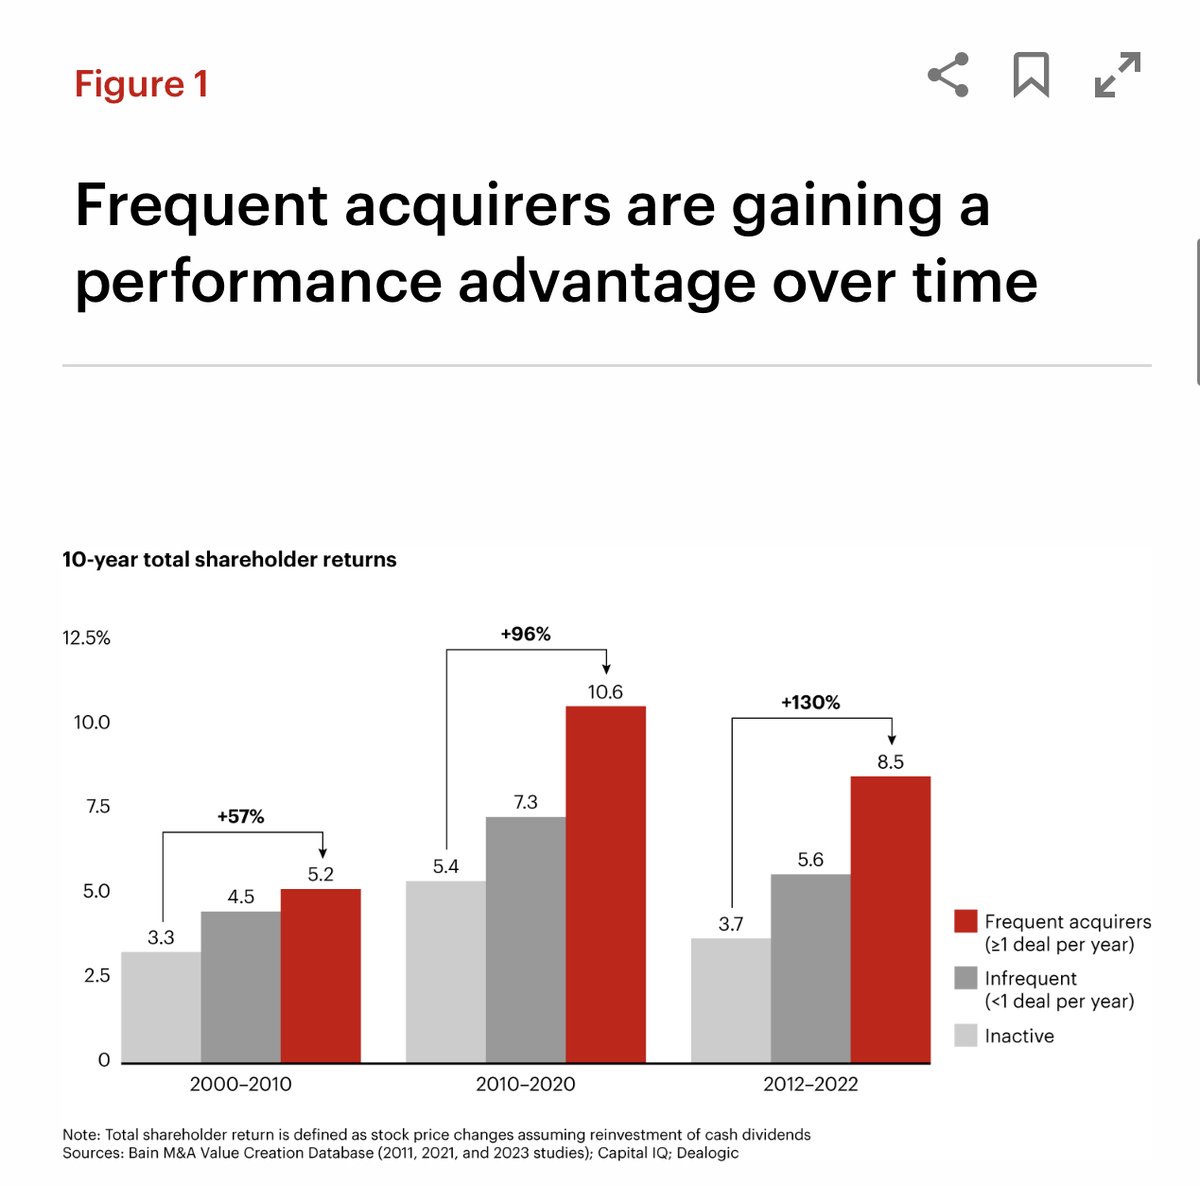 Interesting study from Bain on M&A “Companies that were frequent acquirers earned 130% higher shareholder returns vs. those that stayed out of the market. Sitting on the M&A sideline is generally a losing strategy.”